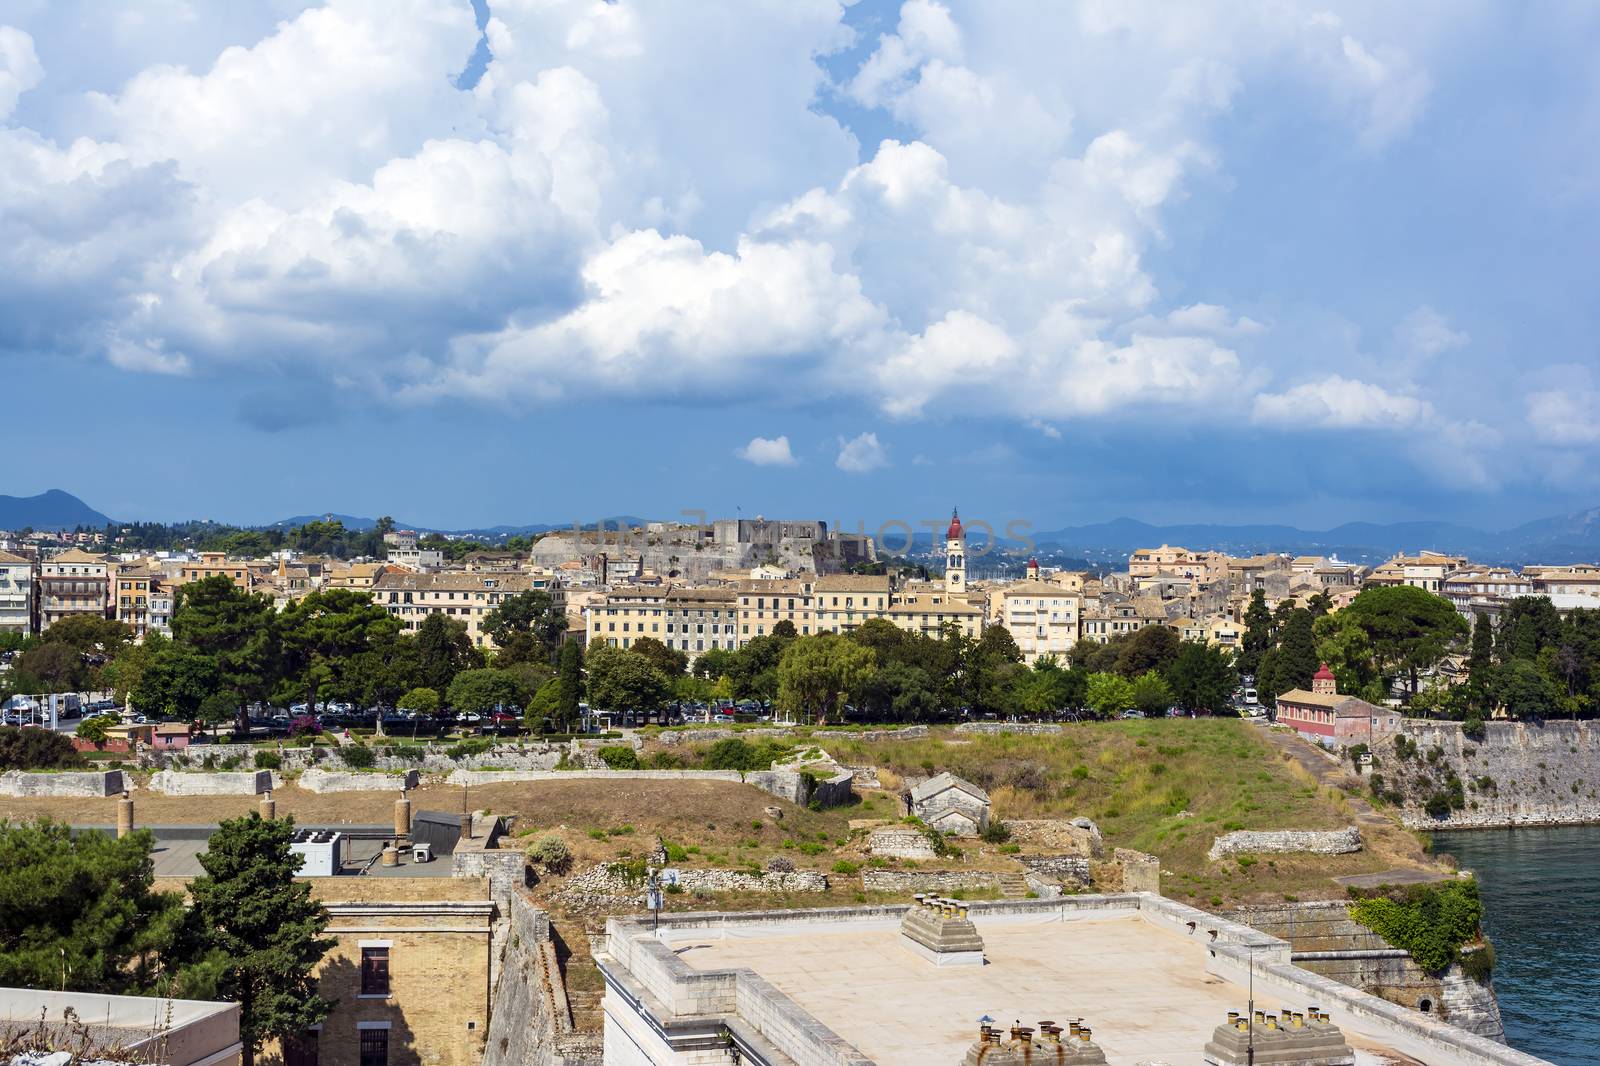 A picturesque view of the city of Corfu from the fortress of the Corfu town. Greece. by ankarb